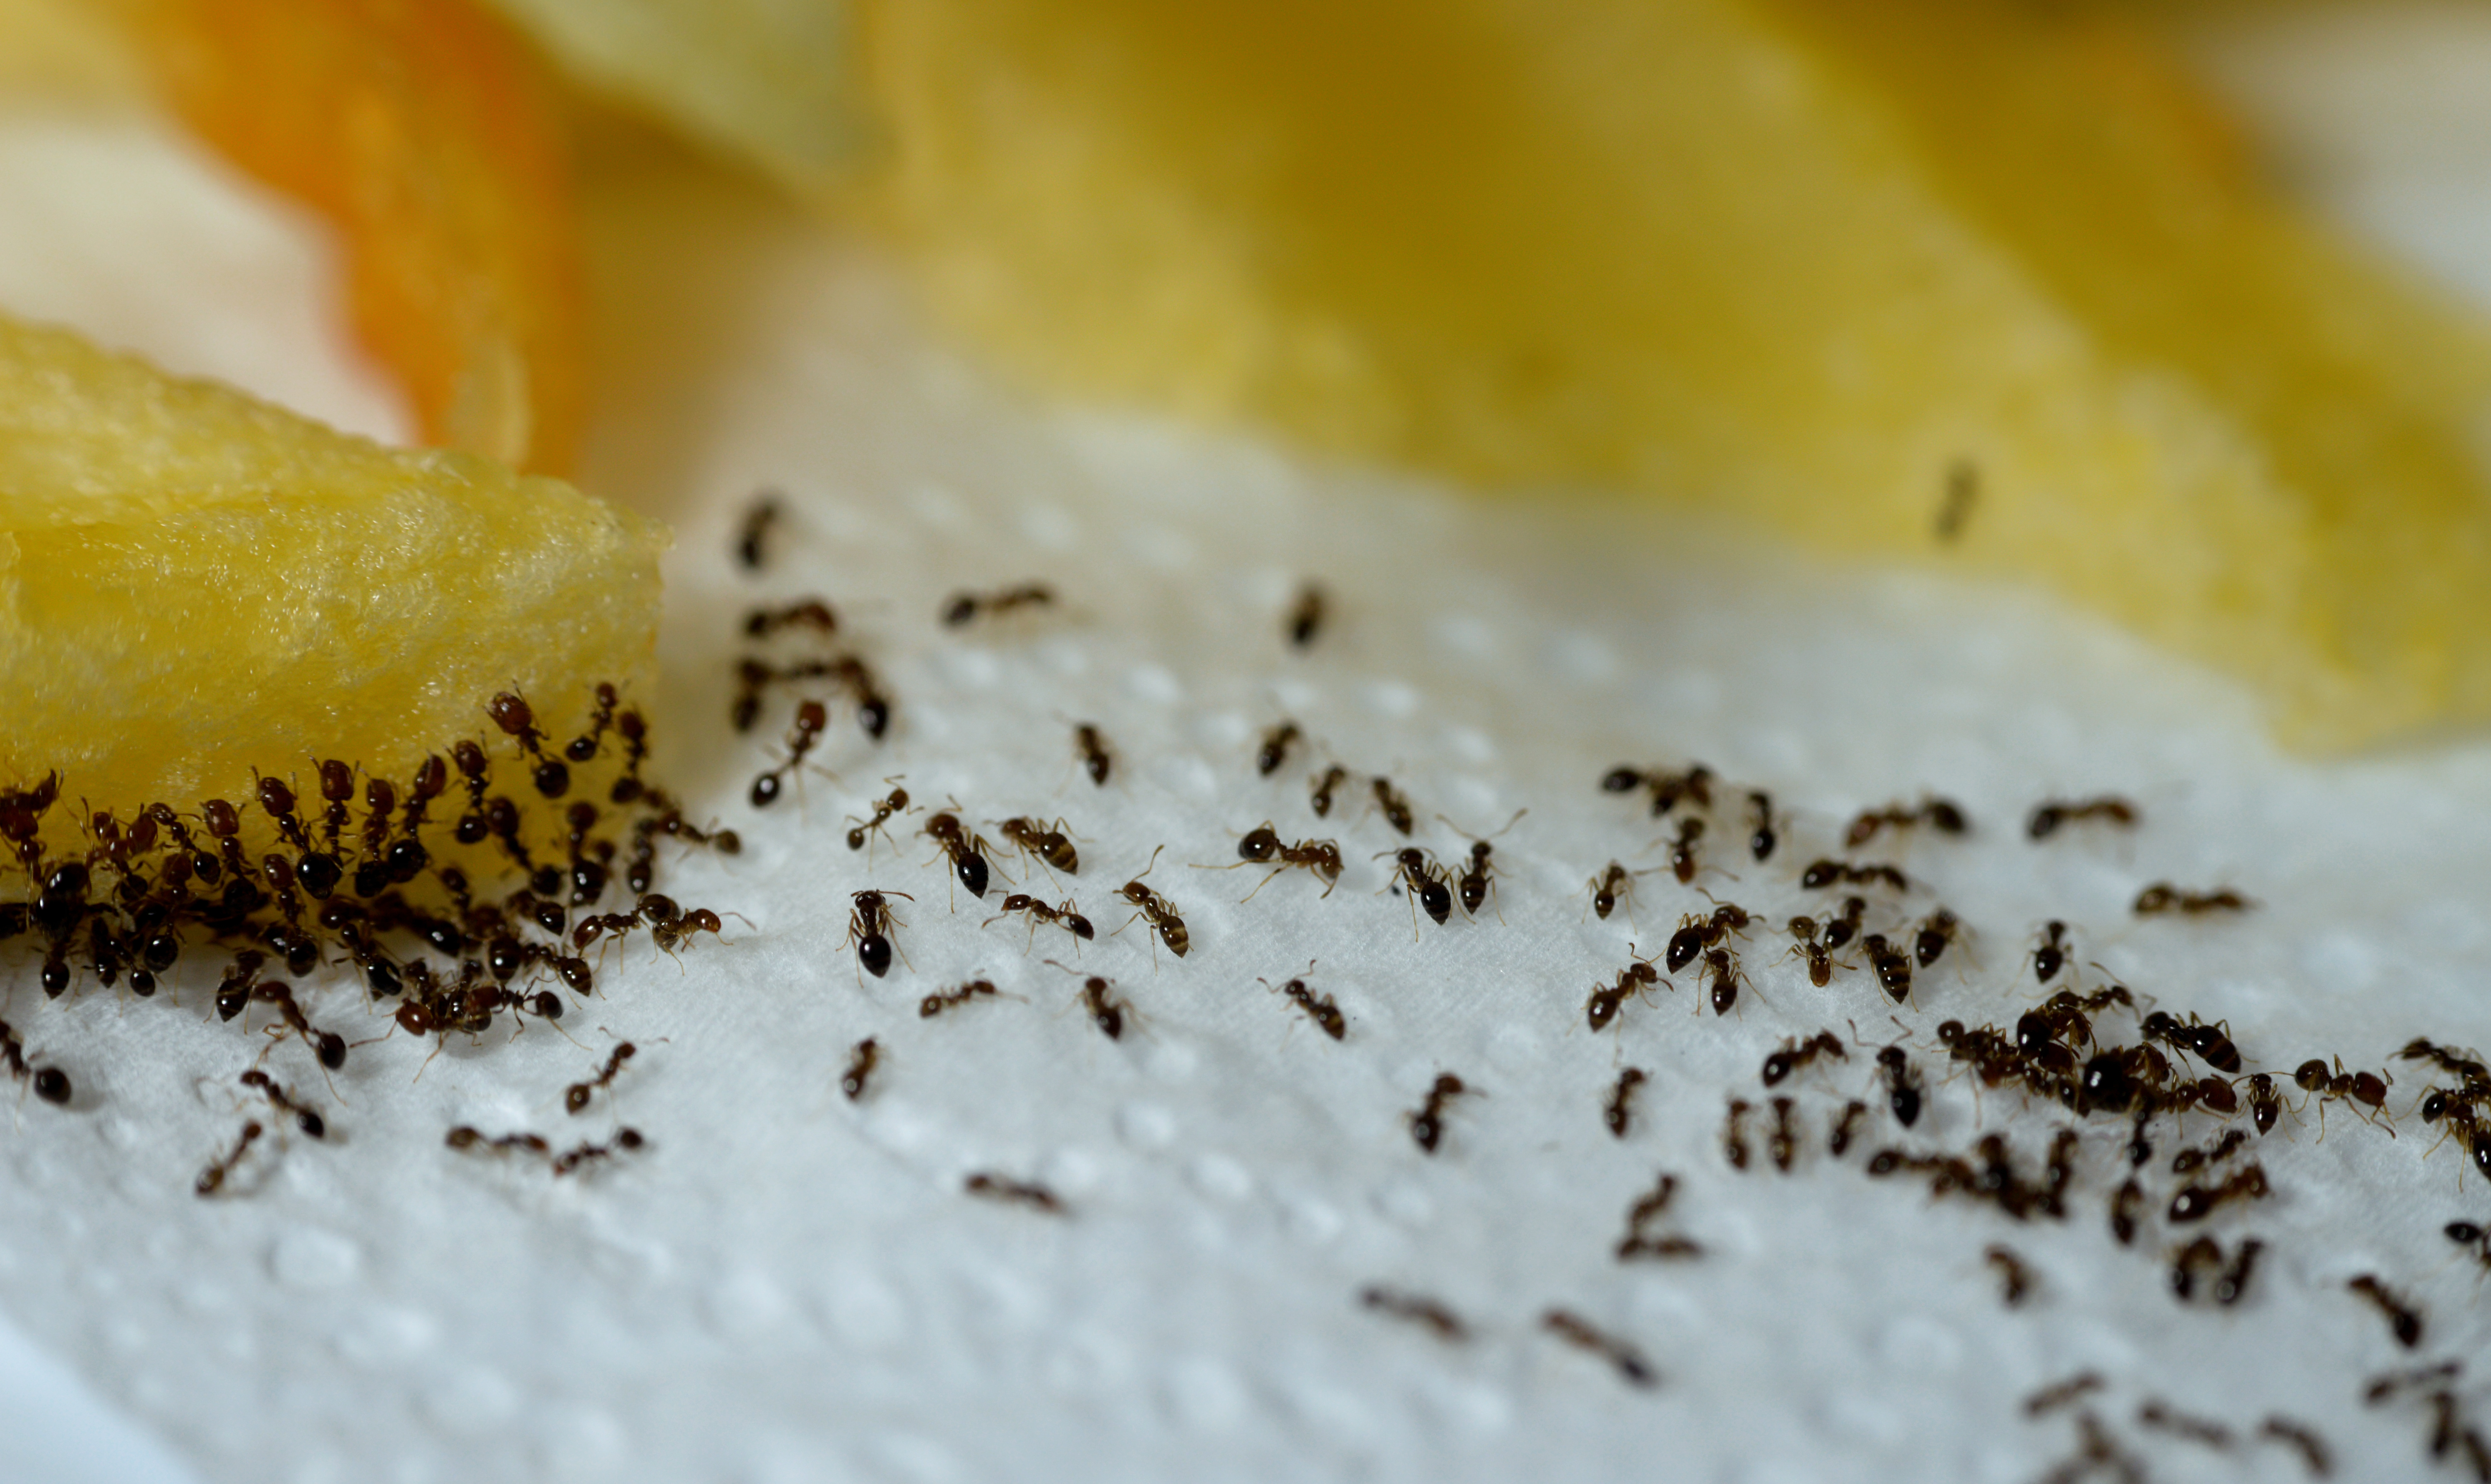 An image of little black ants swarming food - learn how GGA Pest Management can help you control little black ant infestations.